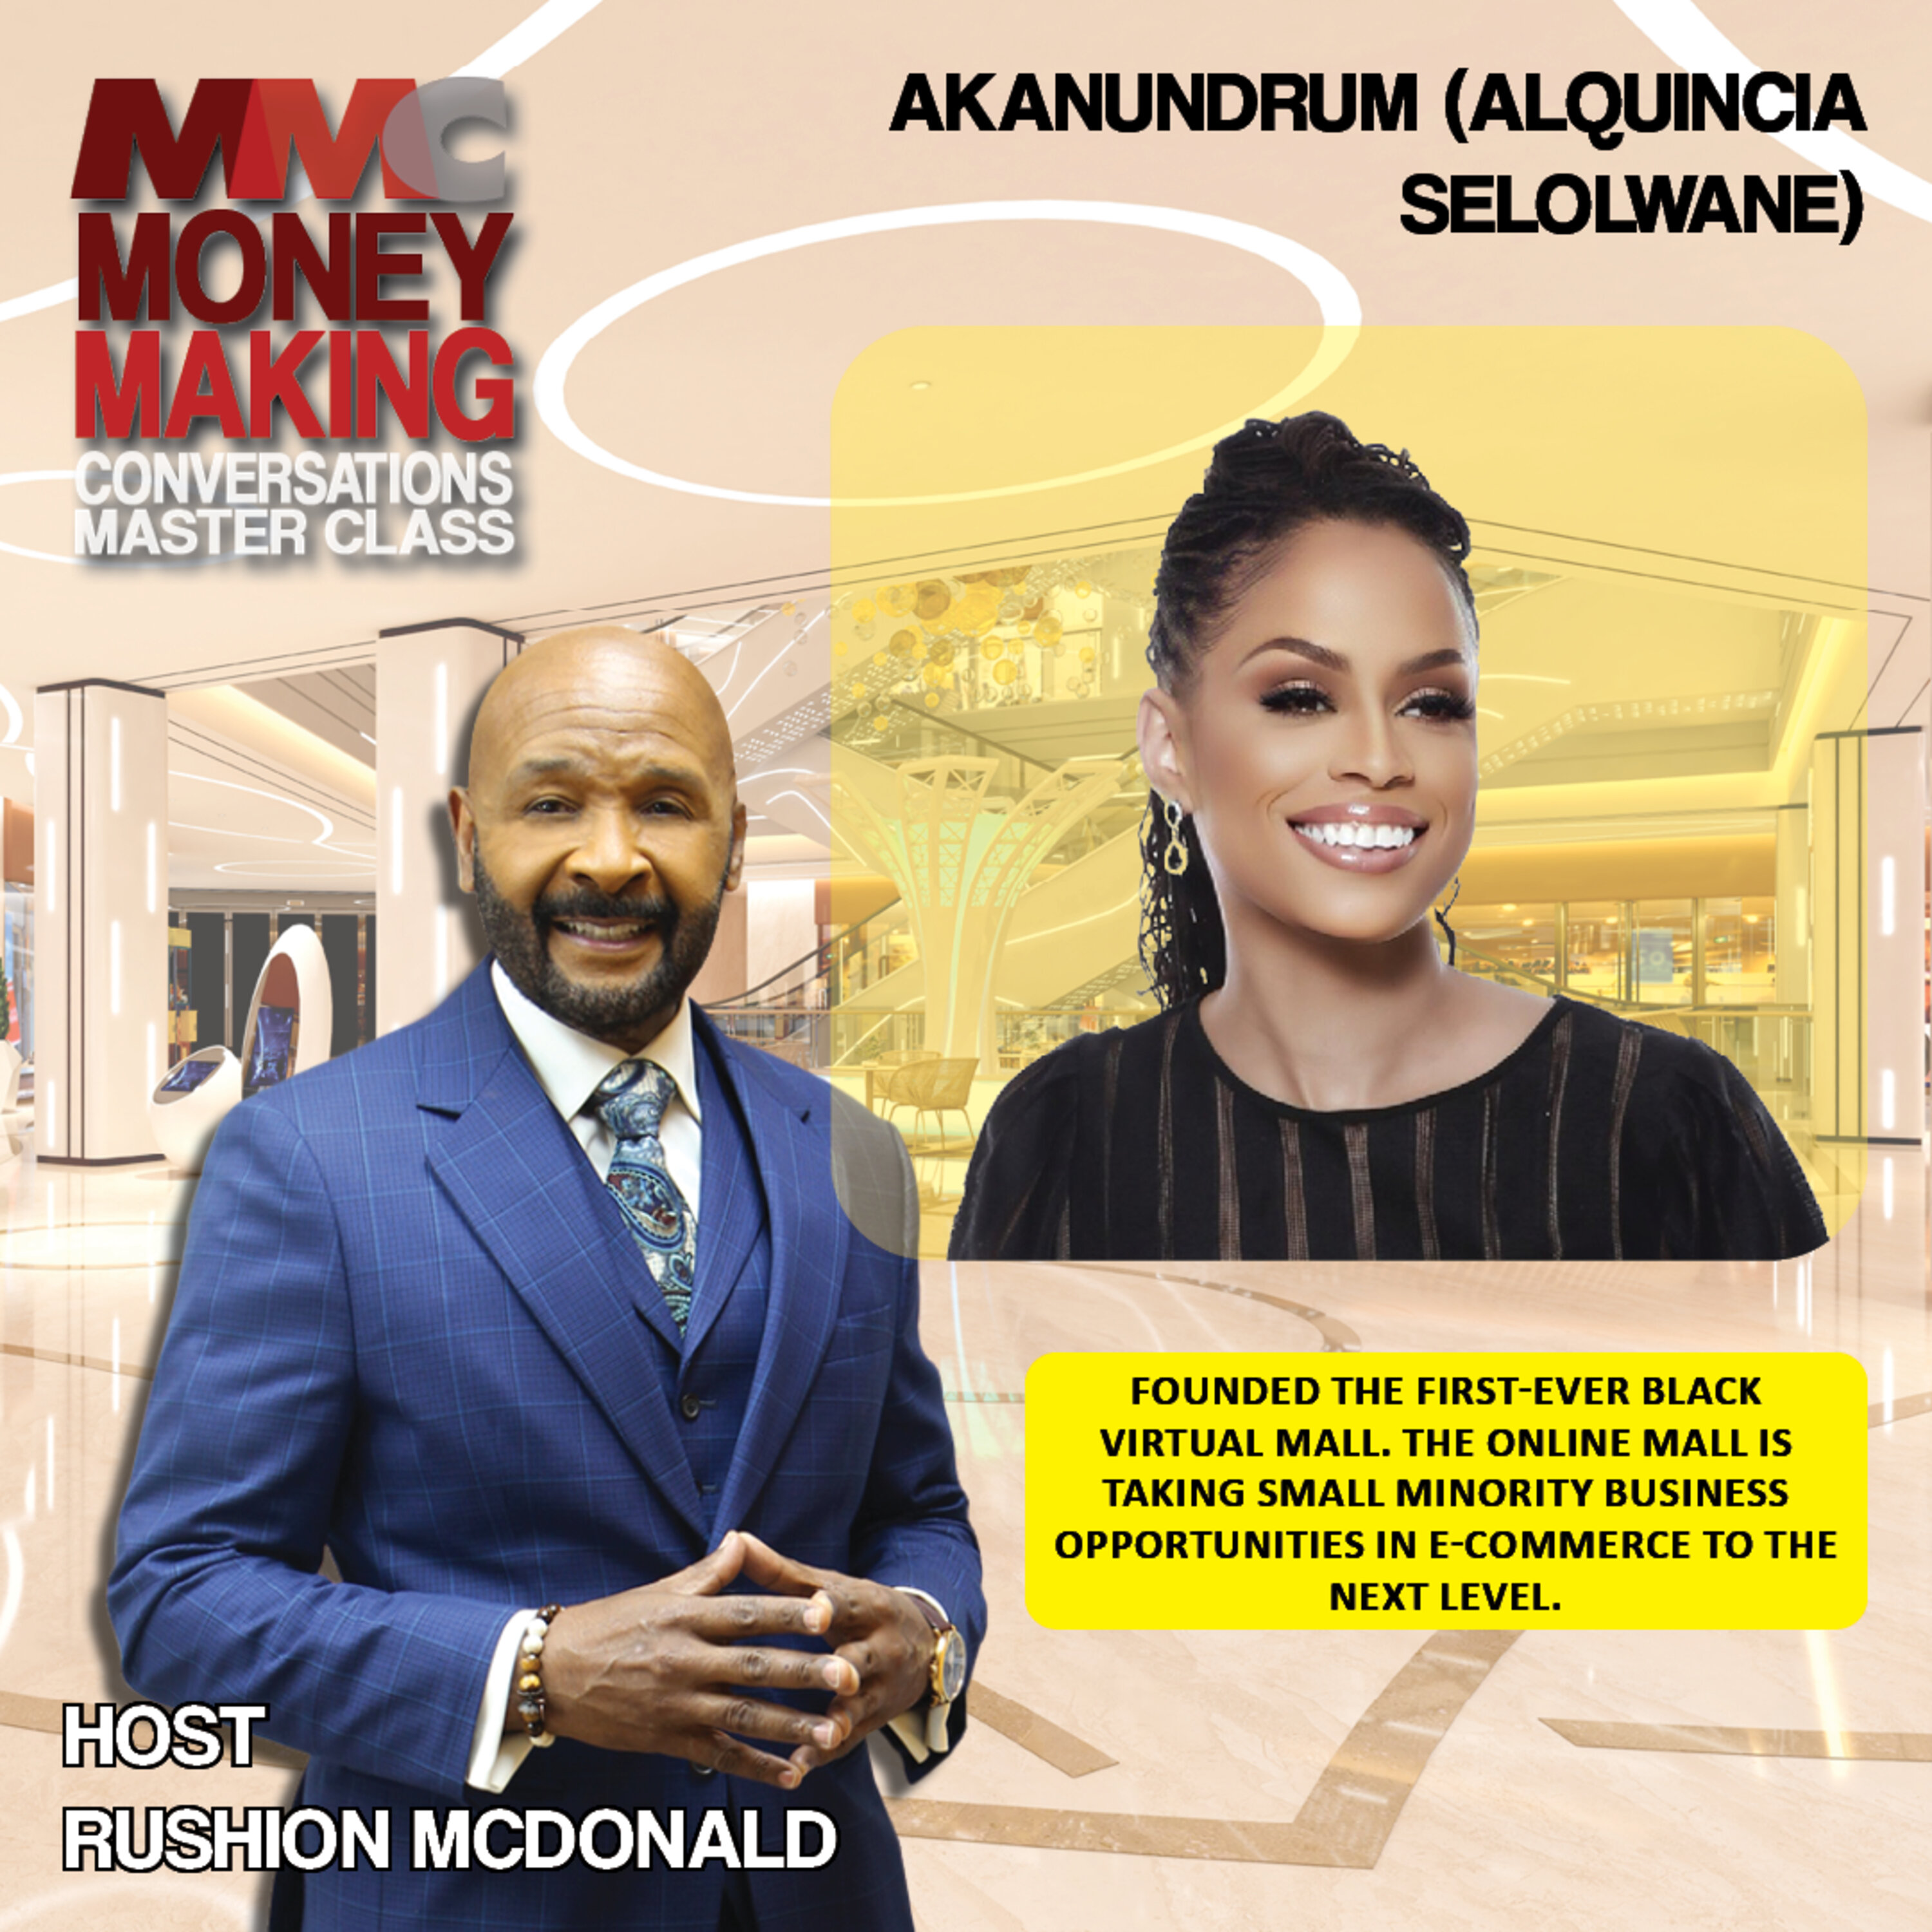 First-ever Black Virtual Shopping Mall founded by Alquincia Selolwane.